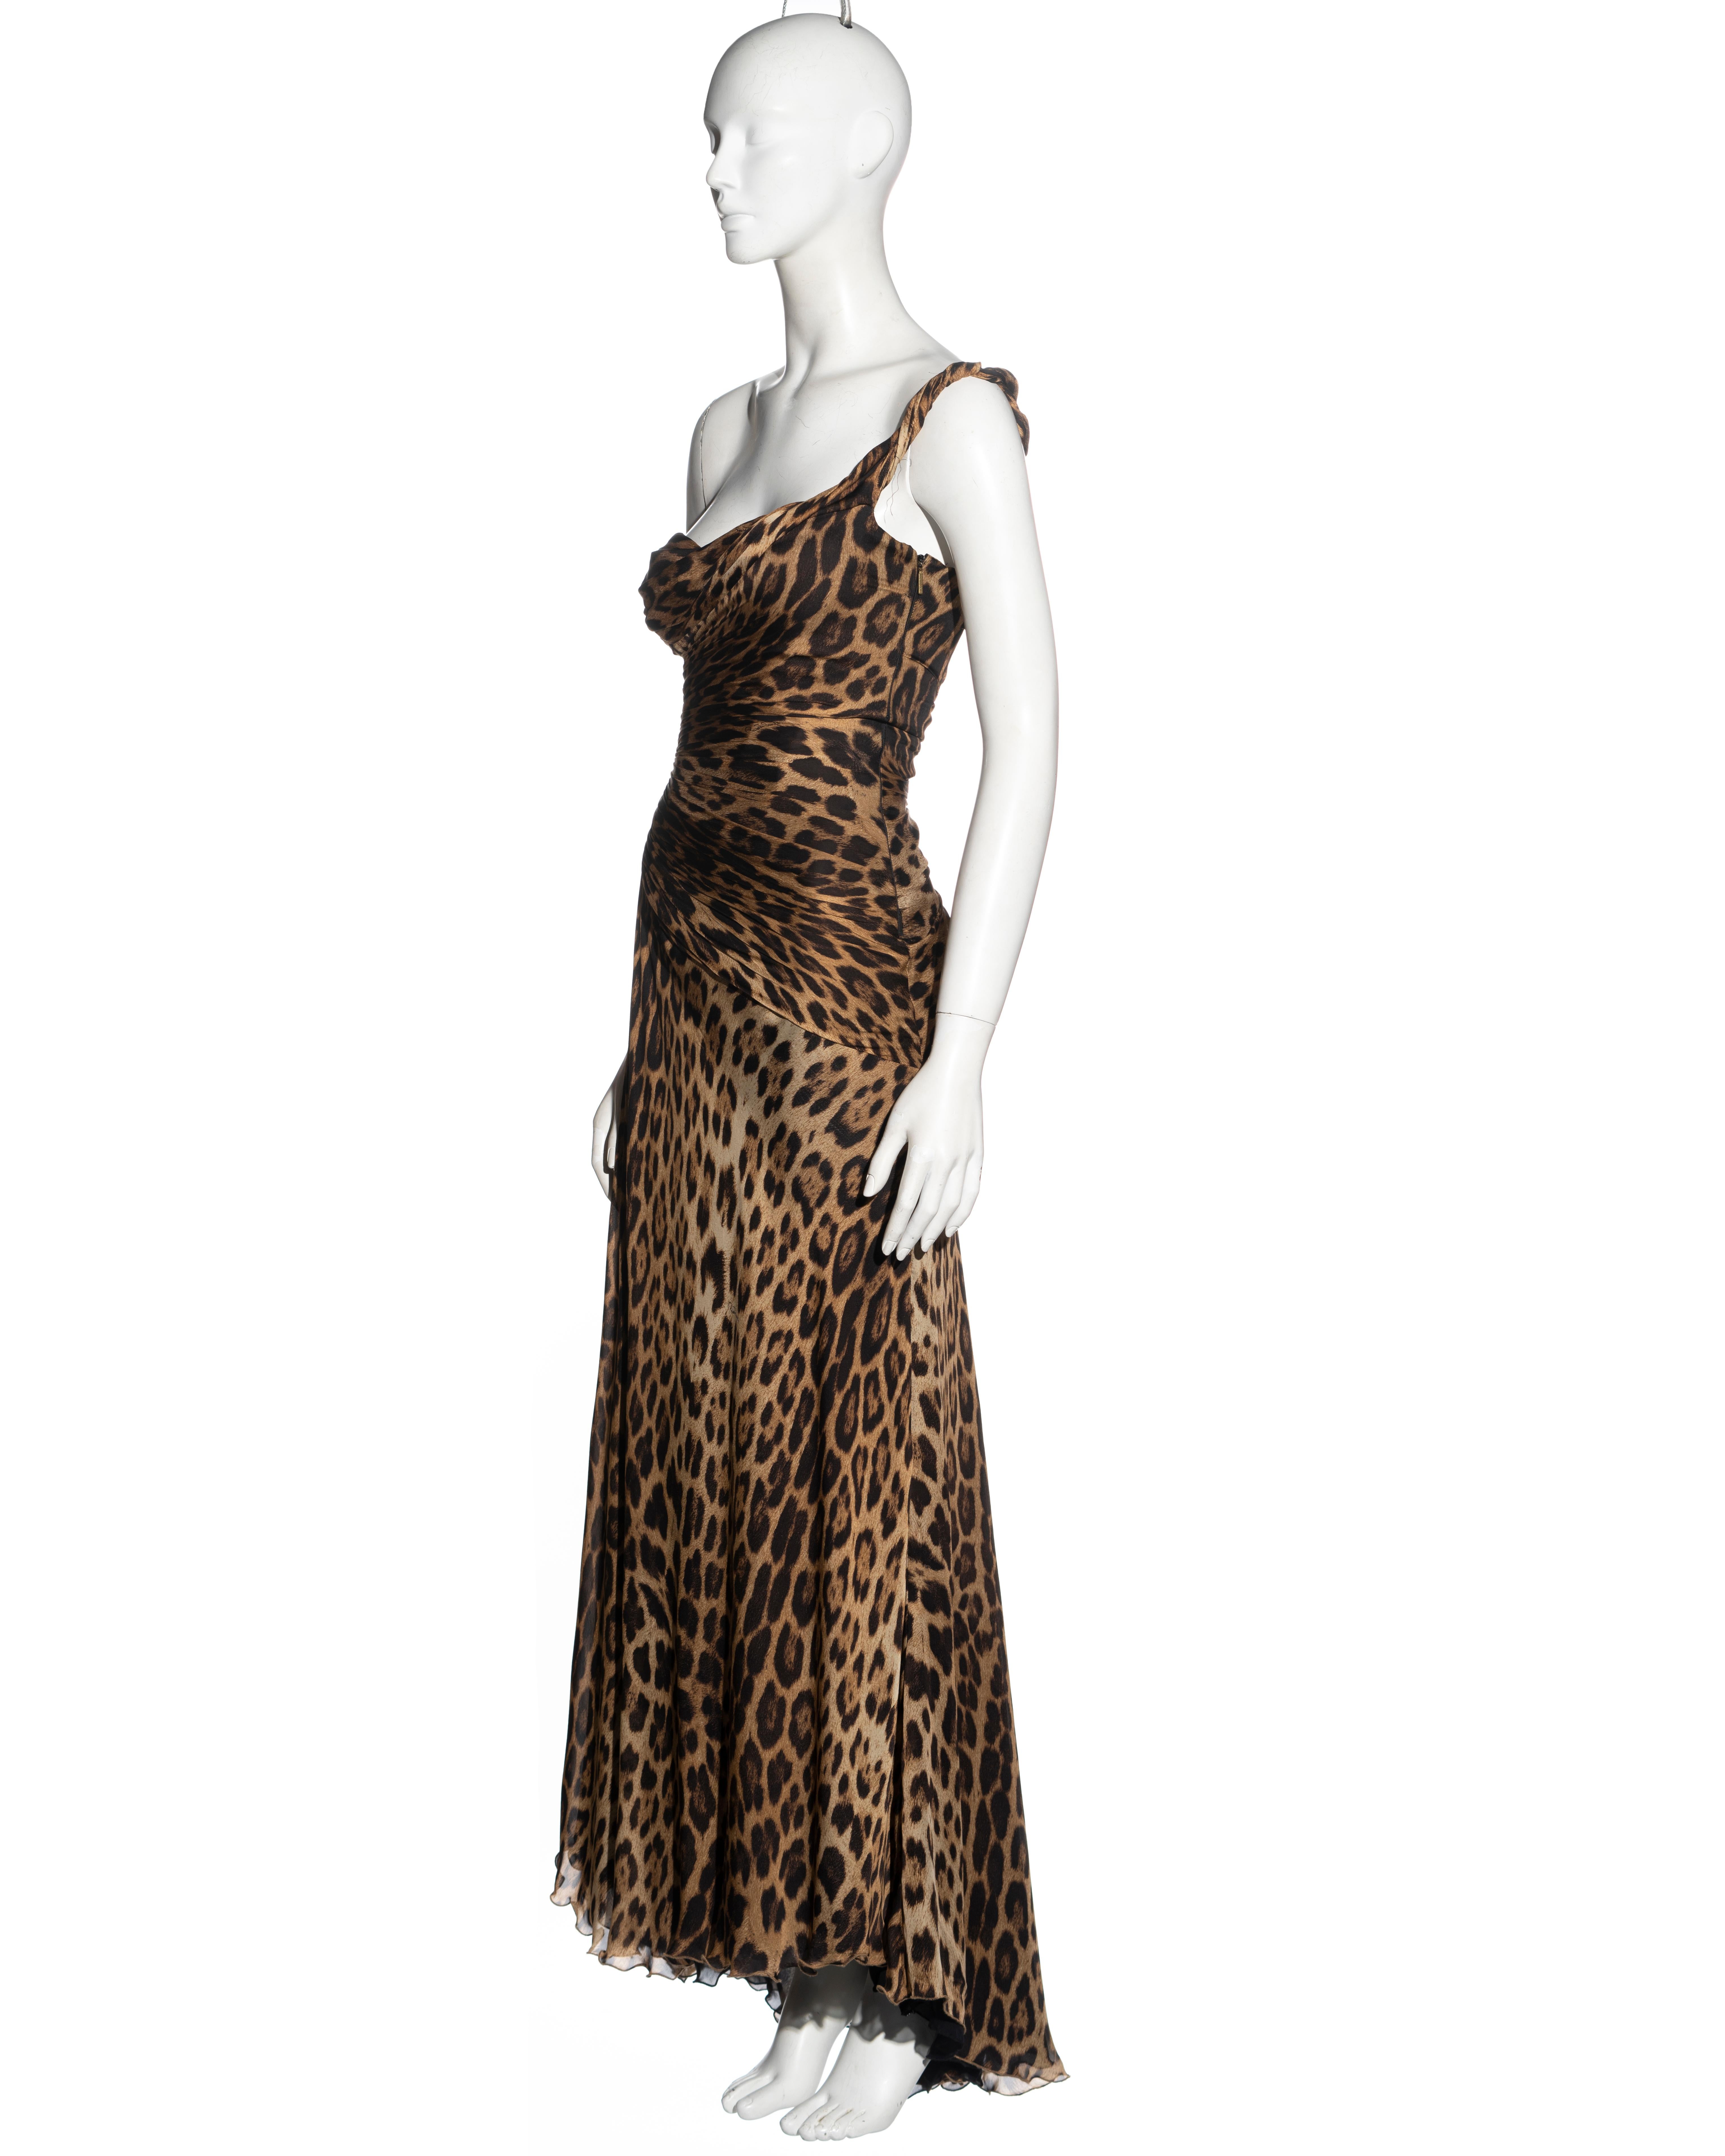 Roberto Cavalli leopard print silk evening dress with built-in corset, fw 2006 For Sale 4